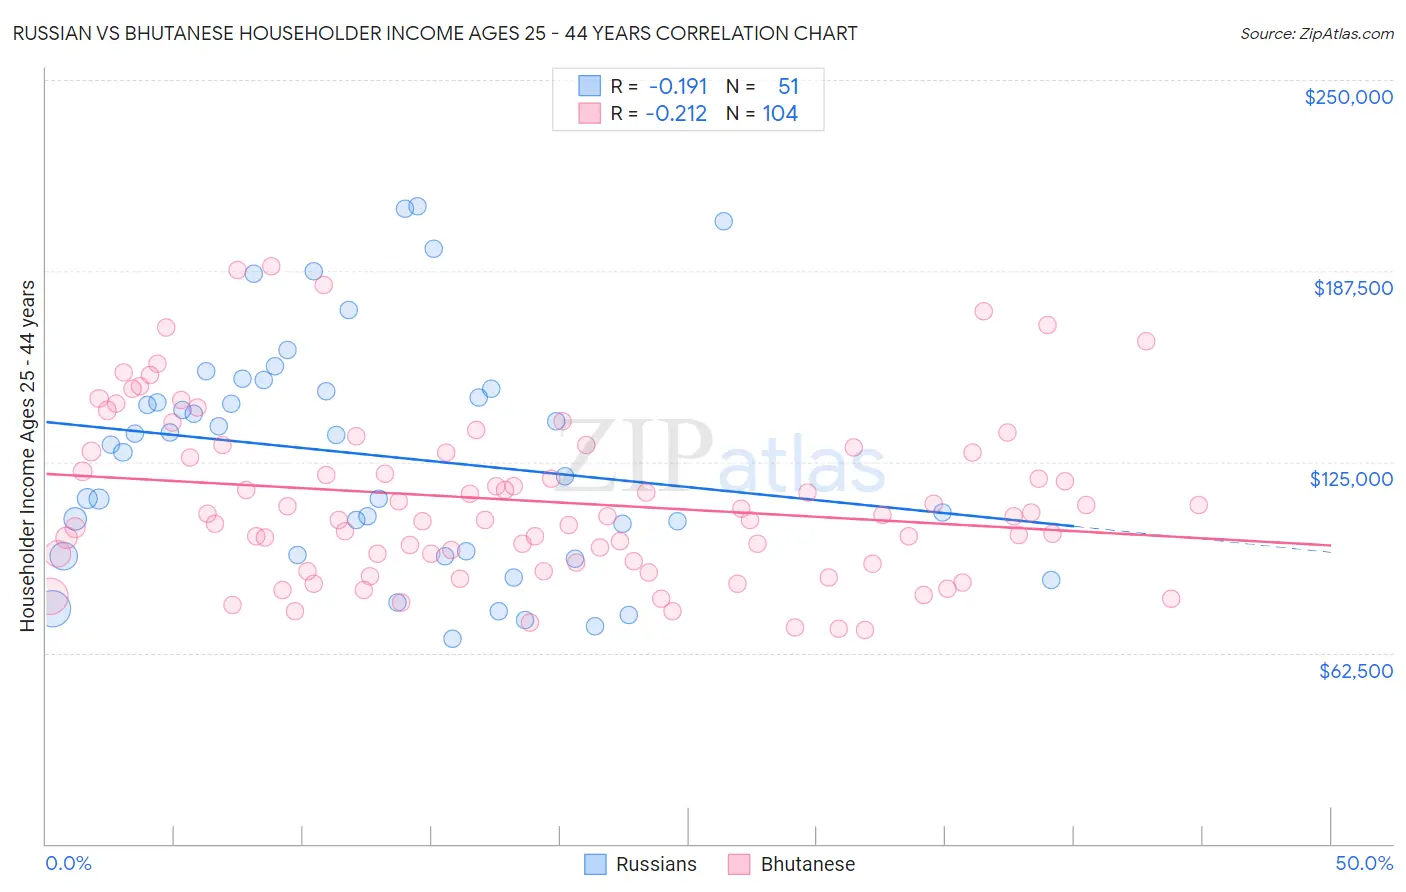 Russian vs Bhutanese Householder Income Ages 25 - 44 years